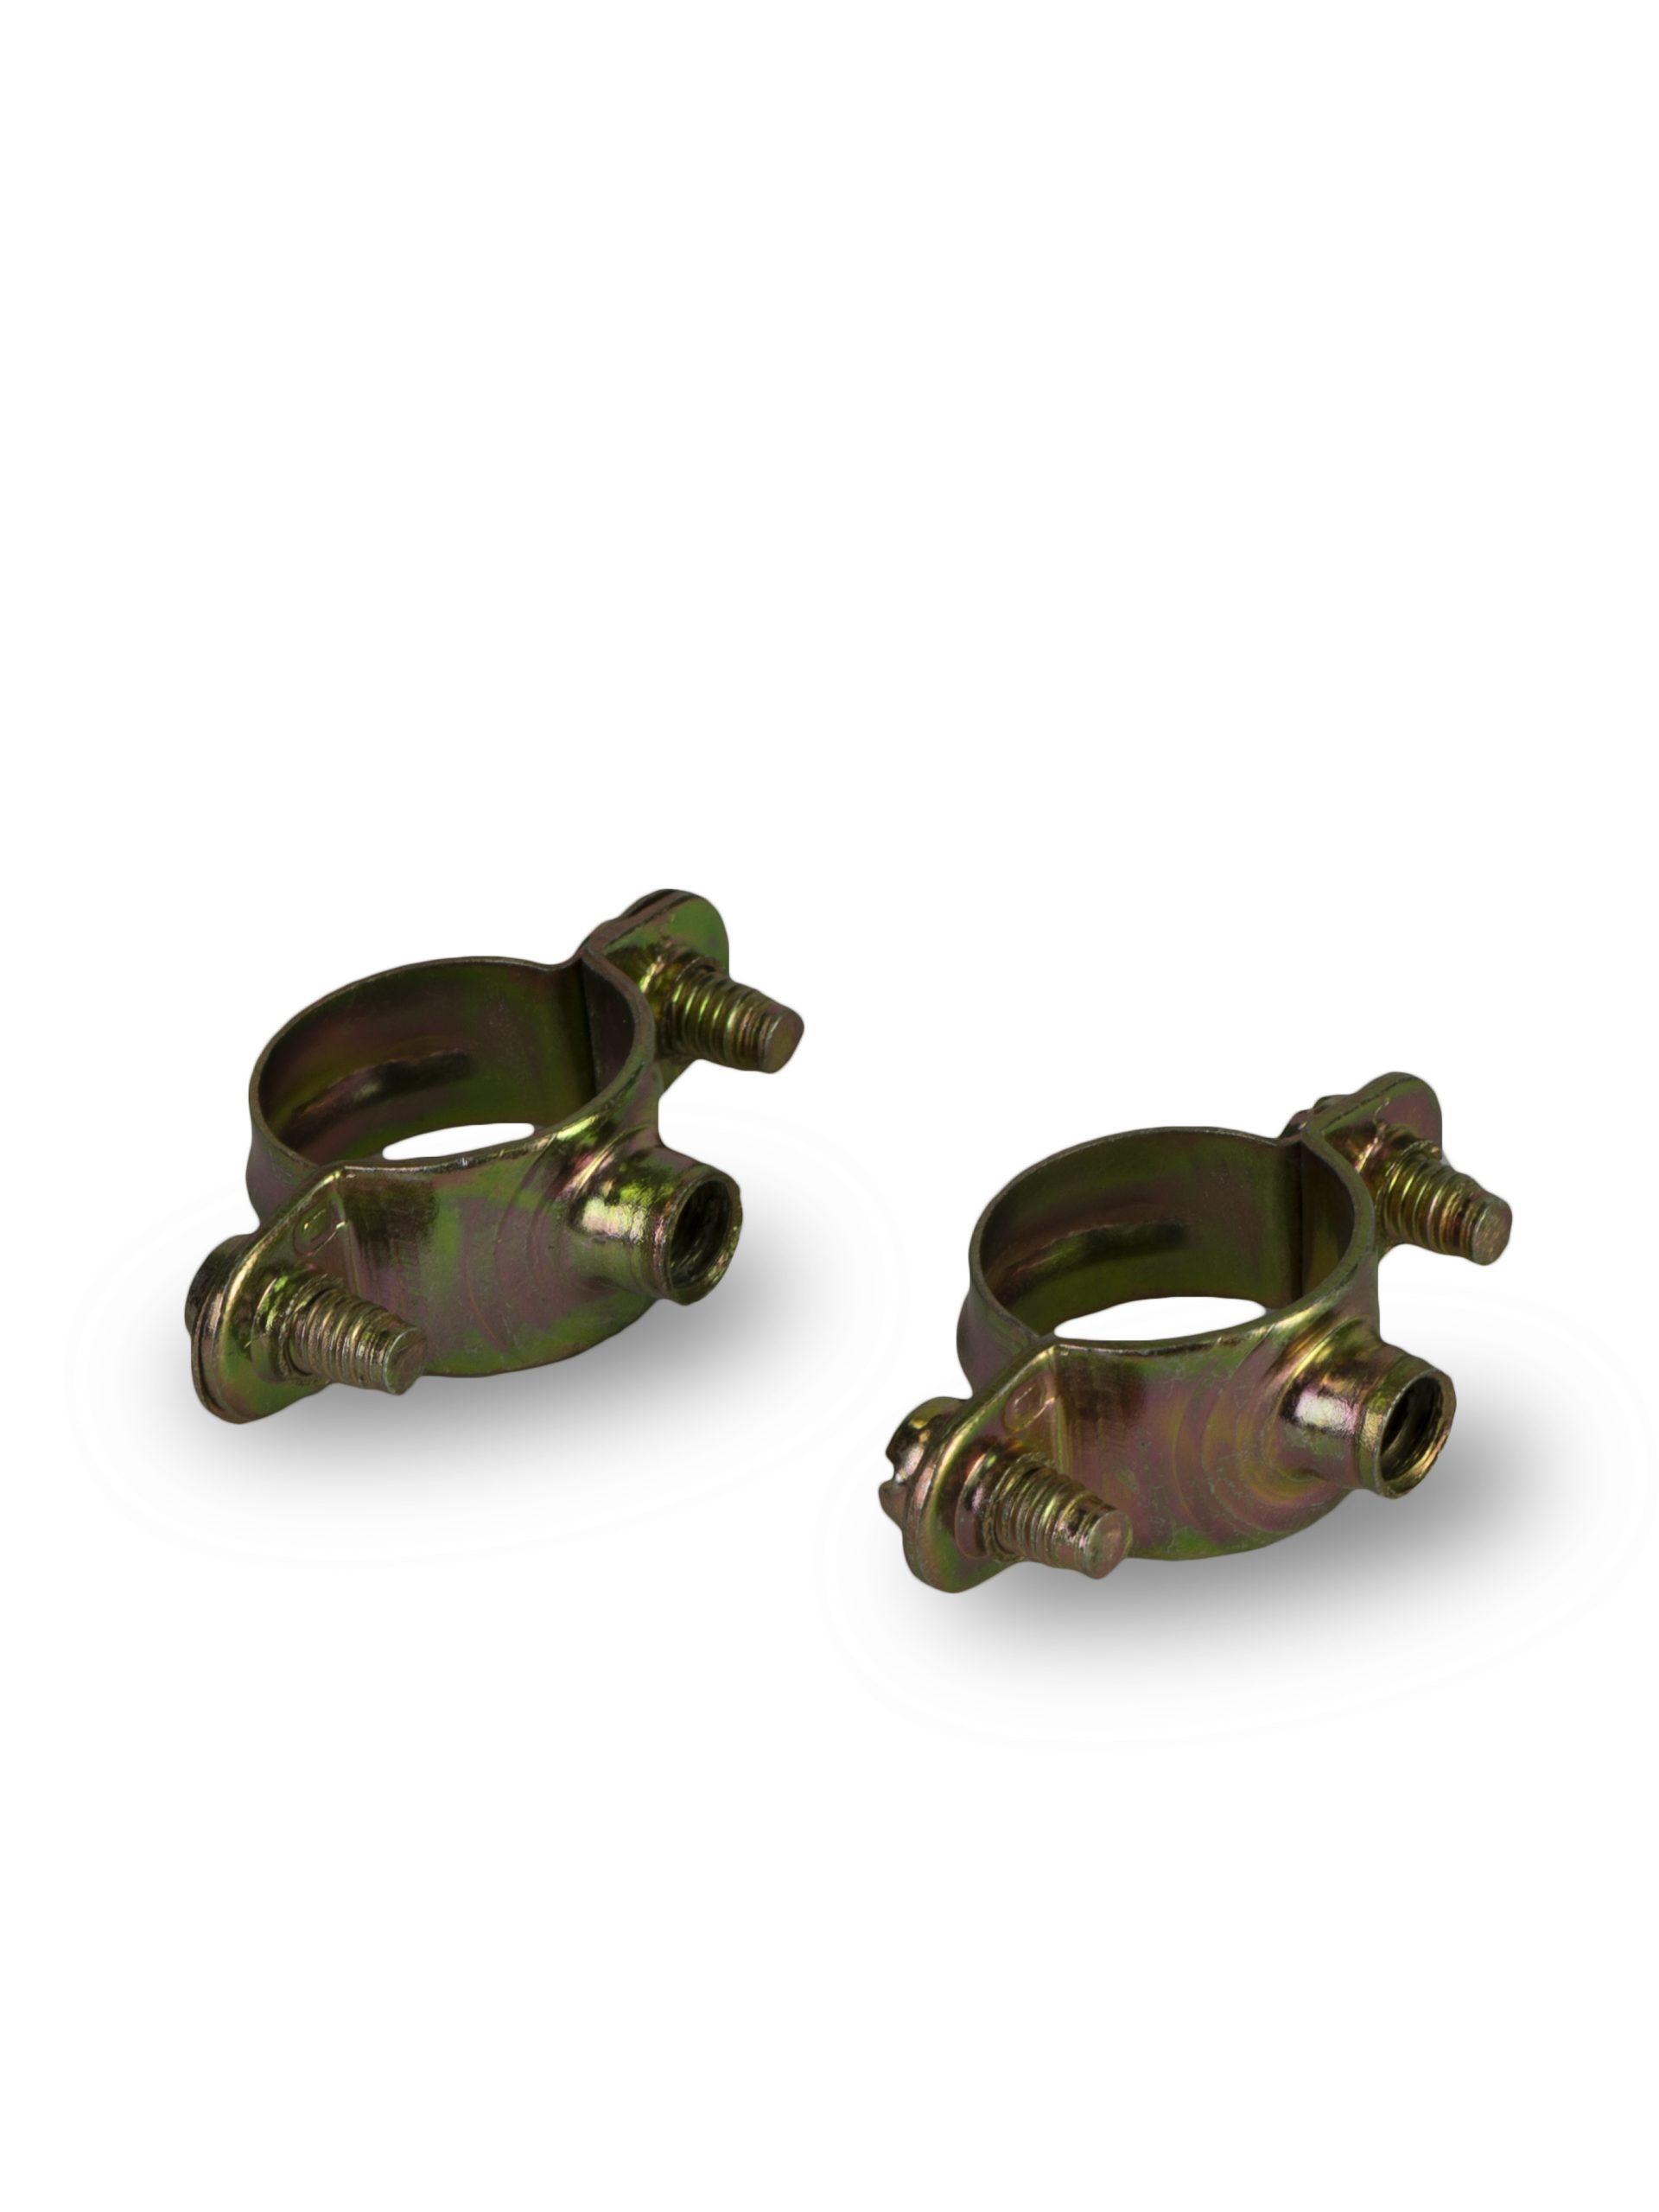 CLAMPS FOR PIPE 40MM , SICOVIS from Gas Equipment Company Llc Abu Dhabi, UNITED ARAB EMIRATES